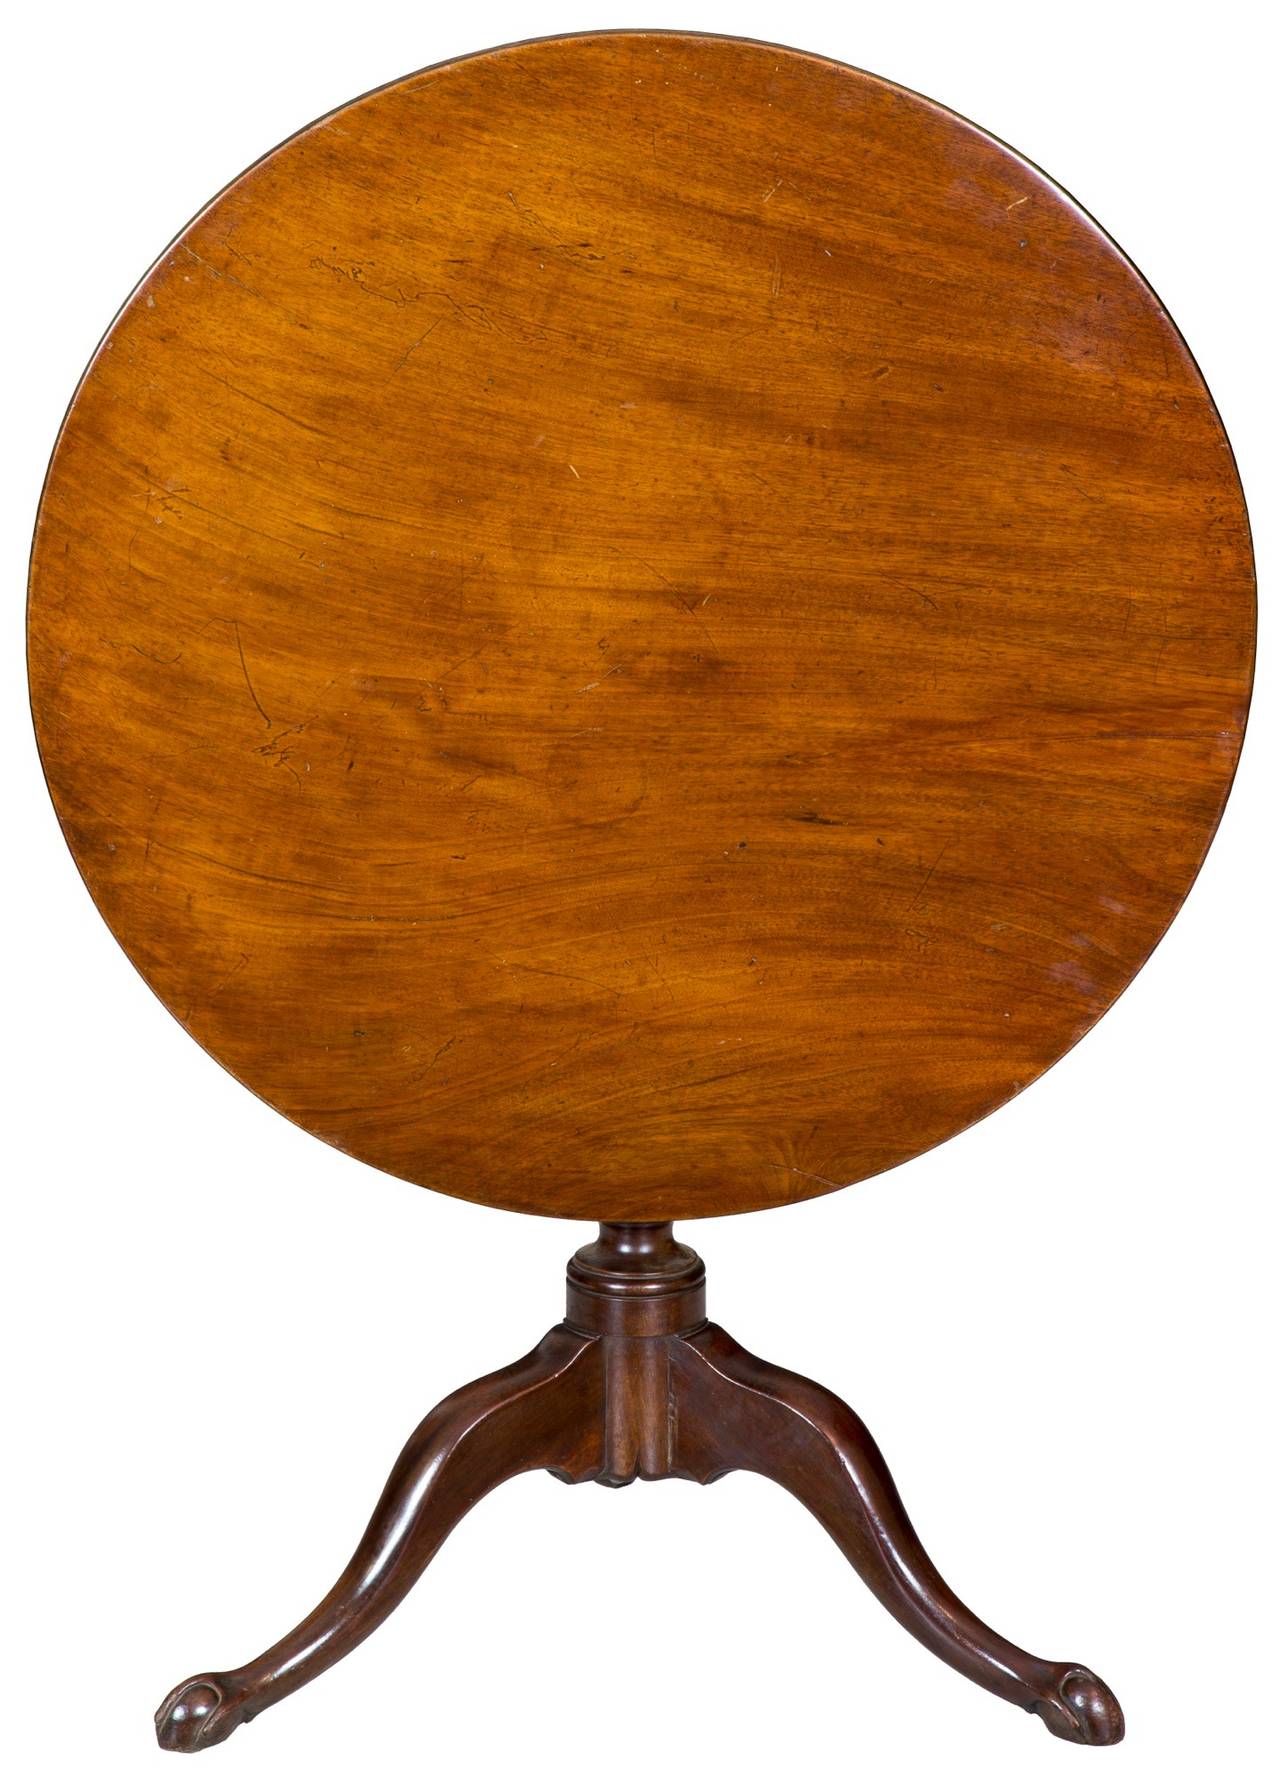 A Chippendale mahogany tilt-top table with small claw and ball feet and spiral carved column, Newport, circa 1780.

This is a very beautiful table in many respects. The top of the table itself is a beautiful slab of dense, heavy Cuban mahogany.